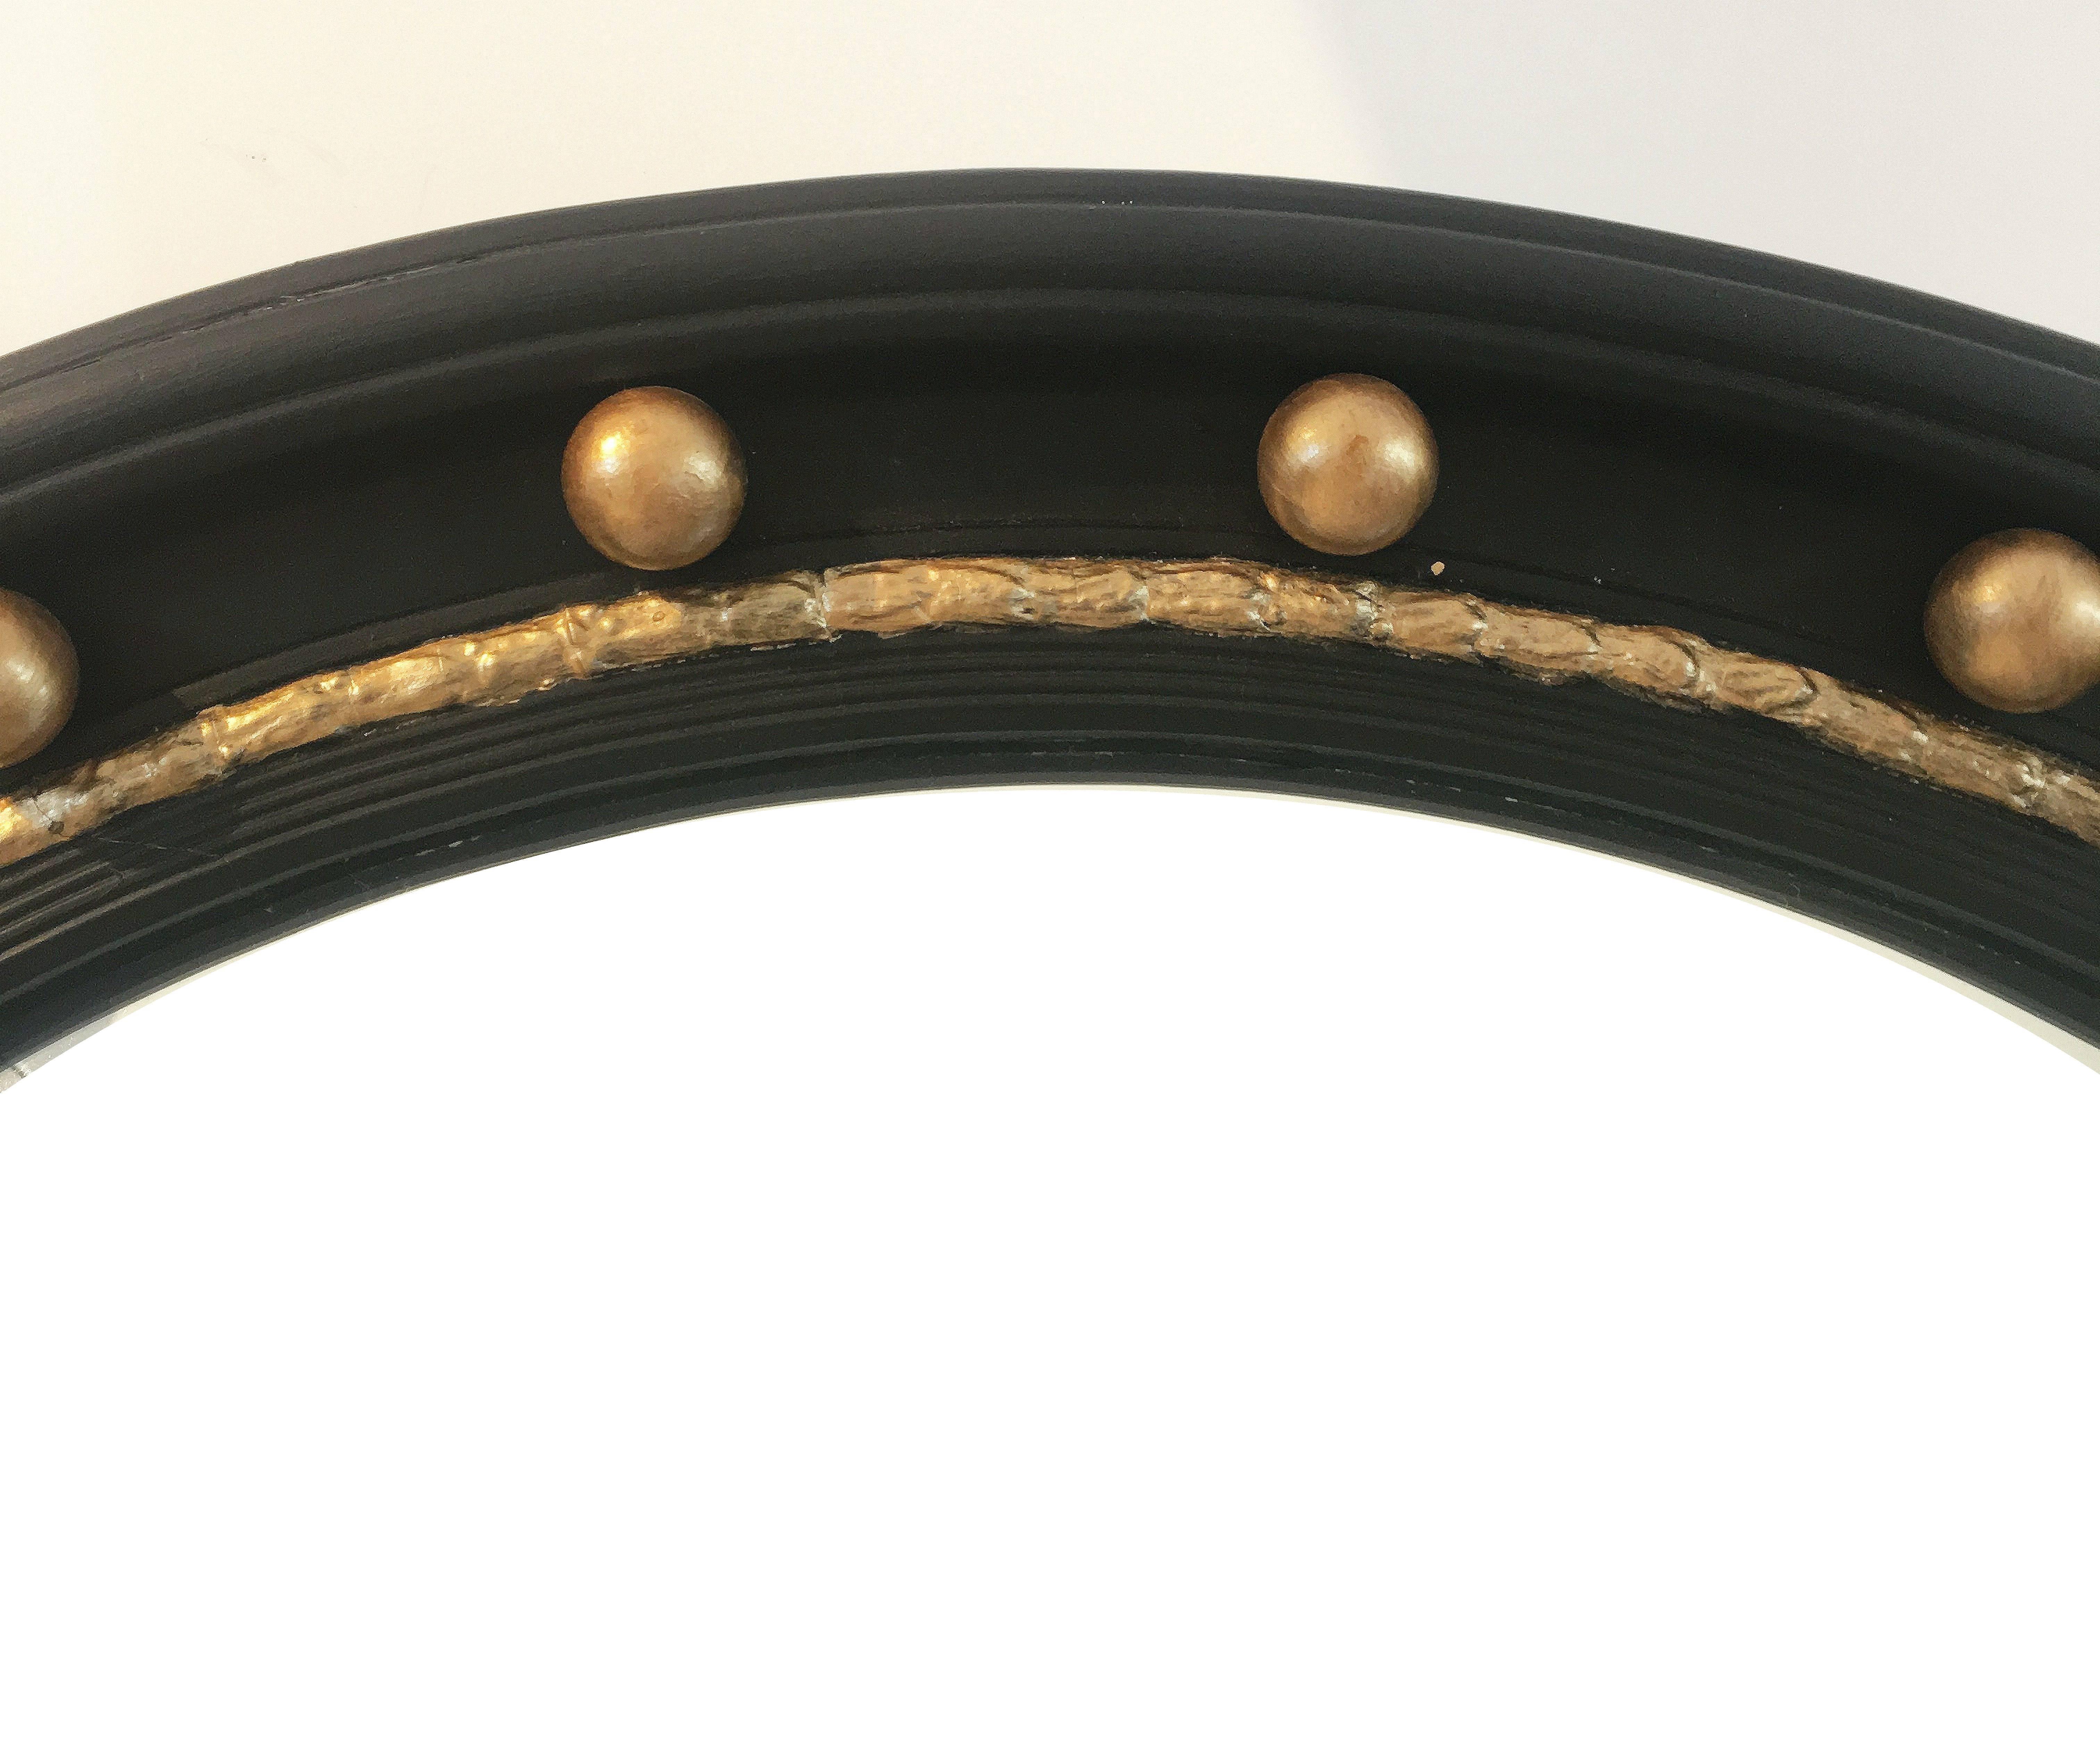 A fine English round convex mirror featuring a Regency design of a moulded, ebonised frame with gilt balls around the circumference.

Diameter is 24 1/2 inches